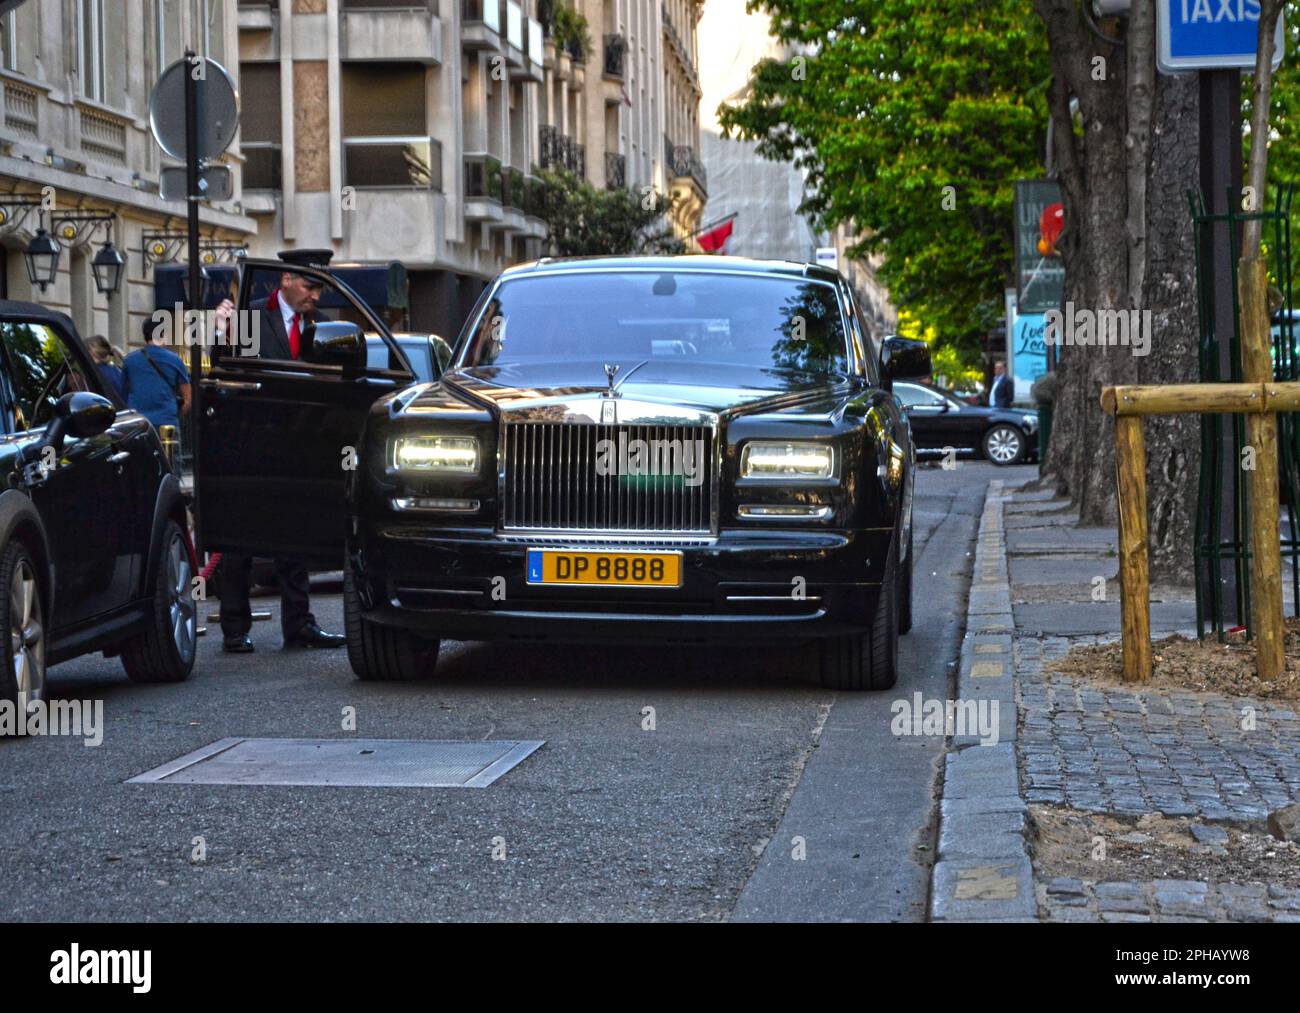 Paris, France - April 18th 2015 : Black Rolls Royce Phantom parked on a street, in George V quarter. An employee of a palace opens the door to the cus Stock Photo